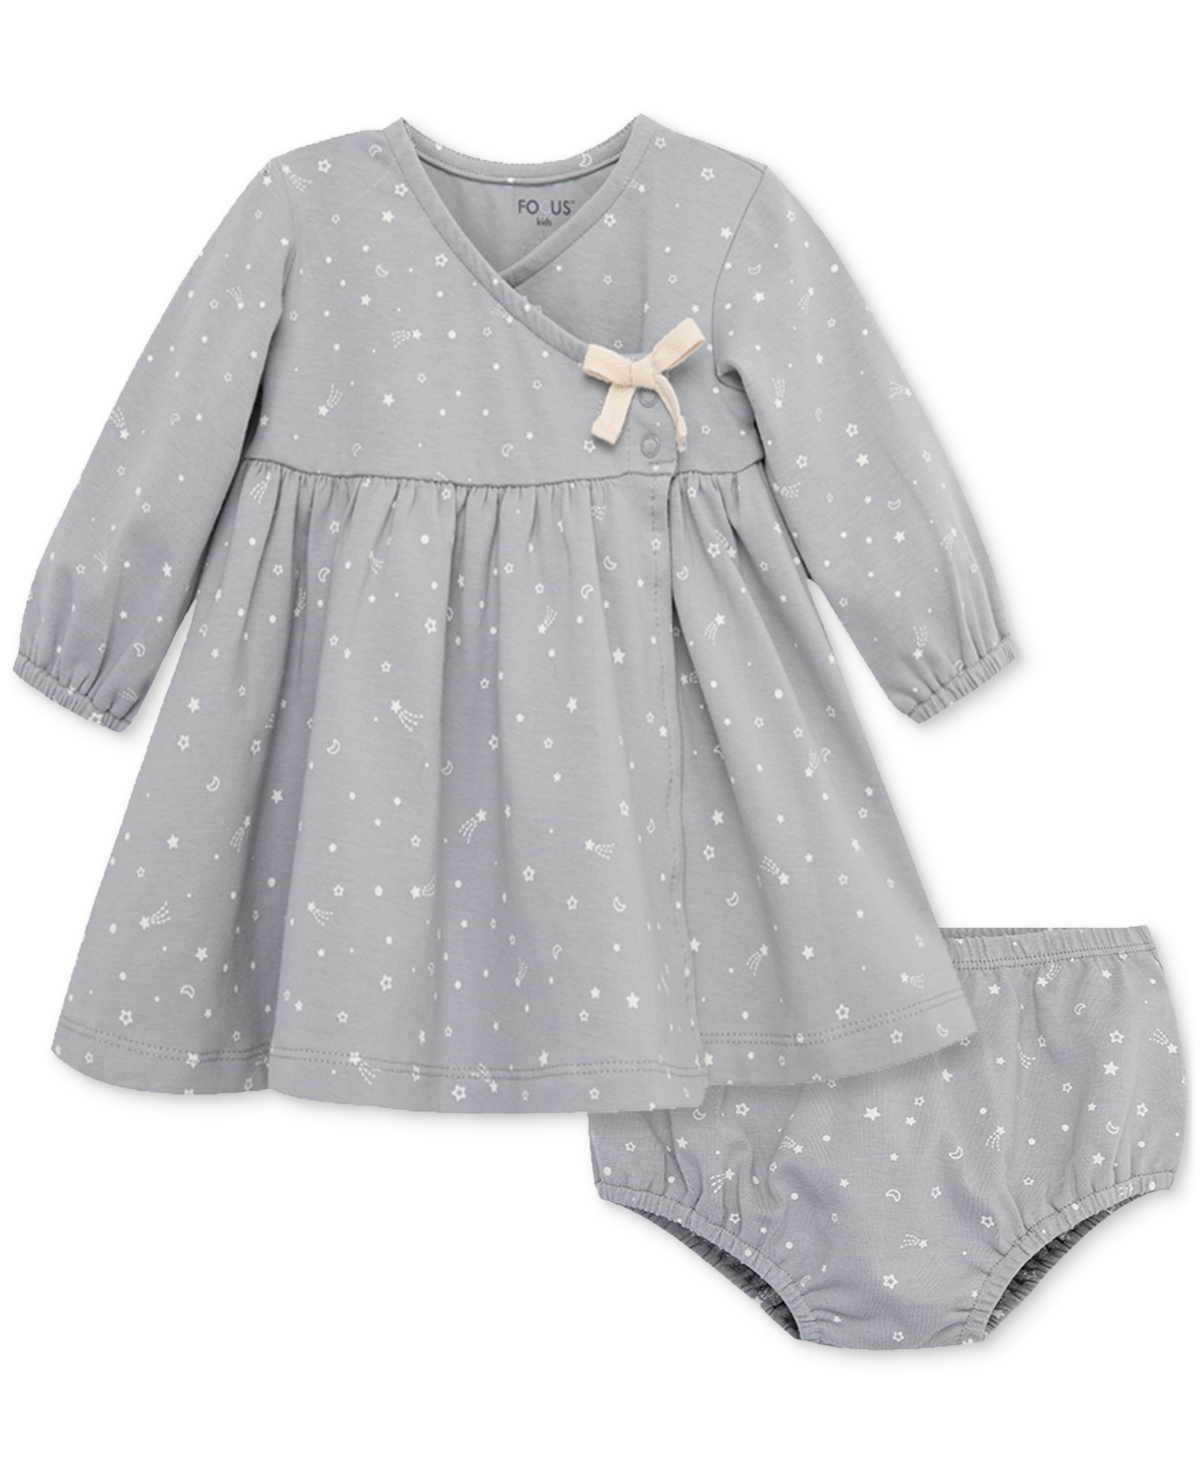 Focus Baby Galaxy Printed Dress And Diaper Cover, 2 Piece Set In Gray